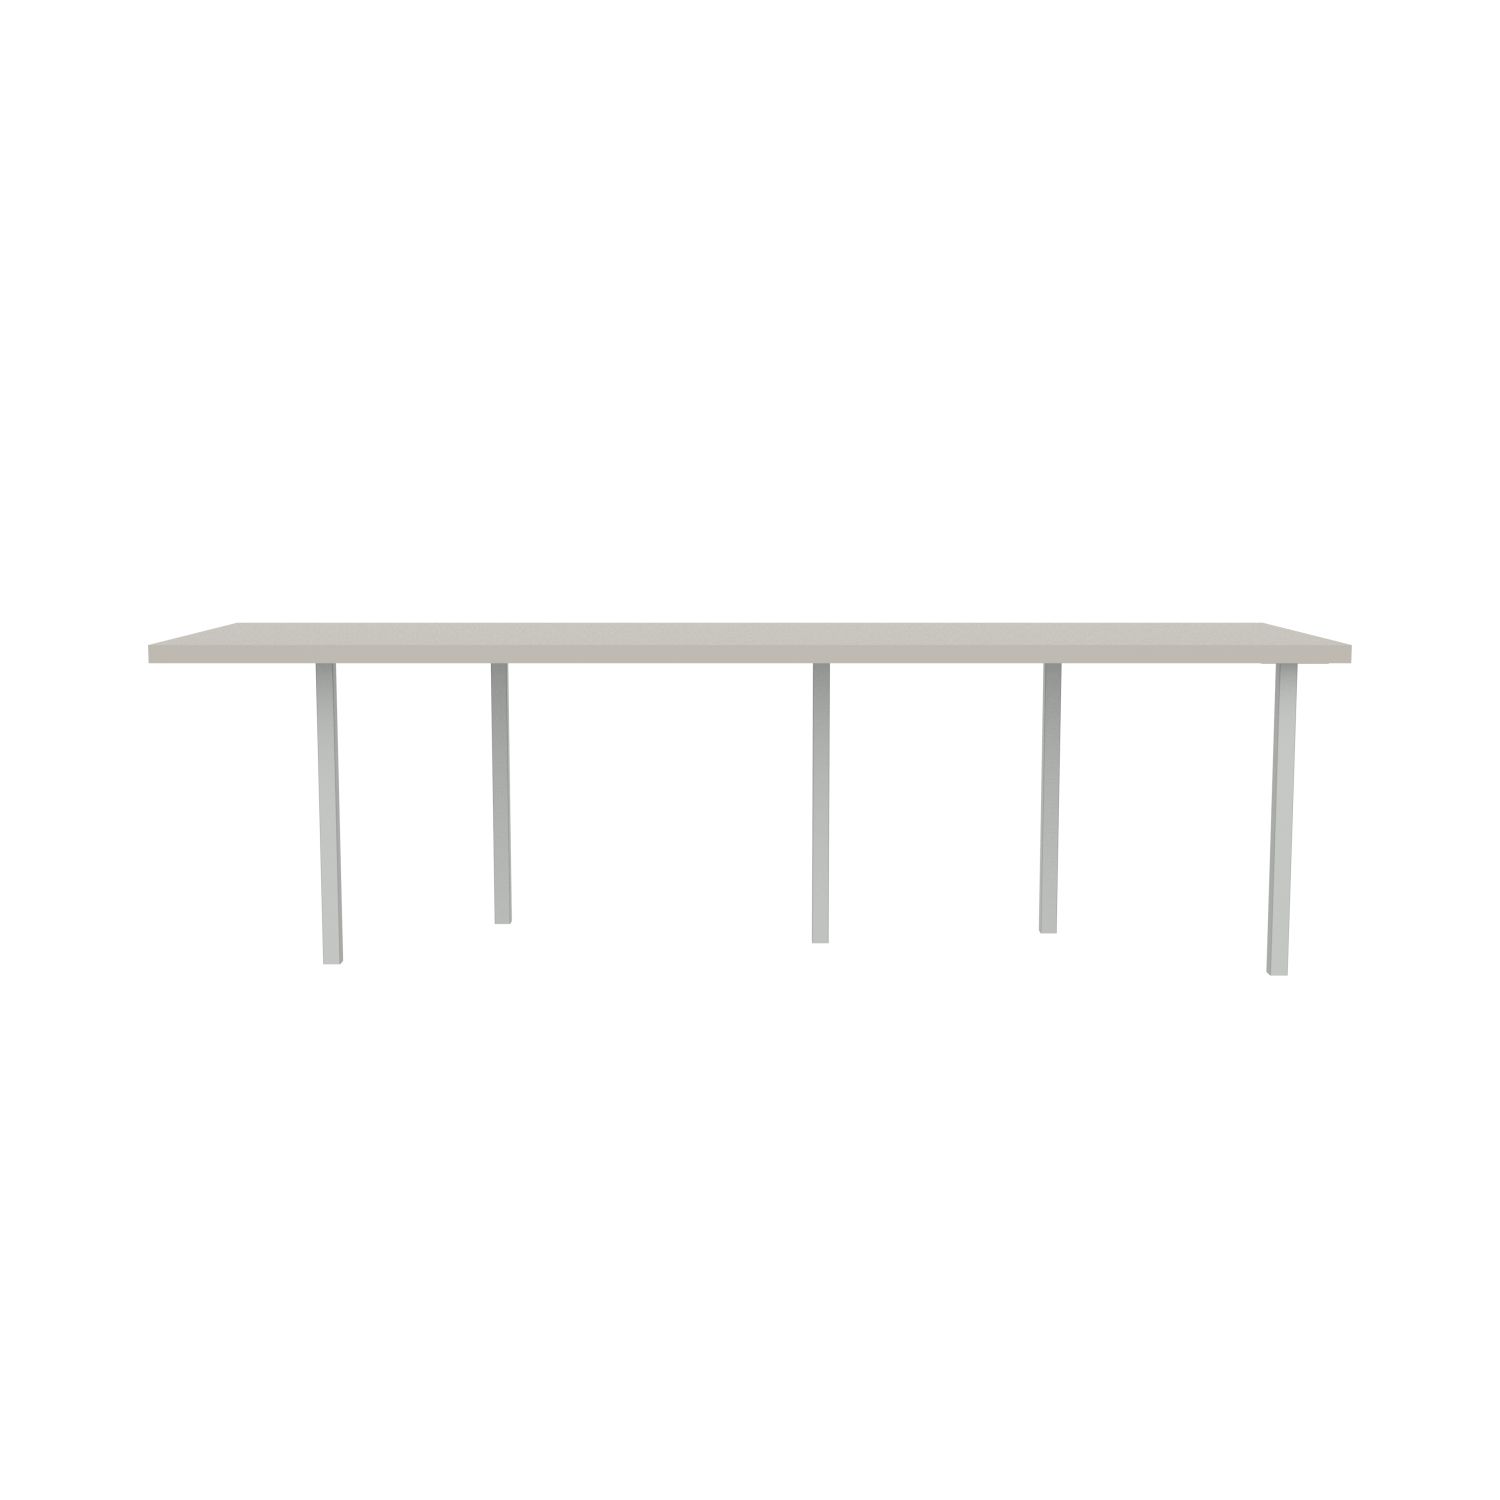 lensvelt bbrand table five fixed heigt 80x264 hpl white 50 mm price level 1 light grey ral7035